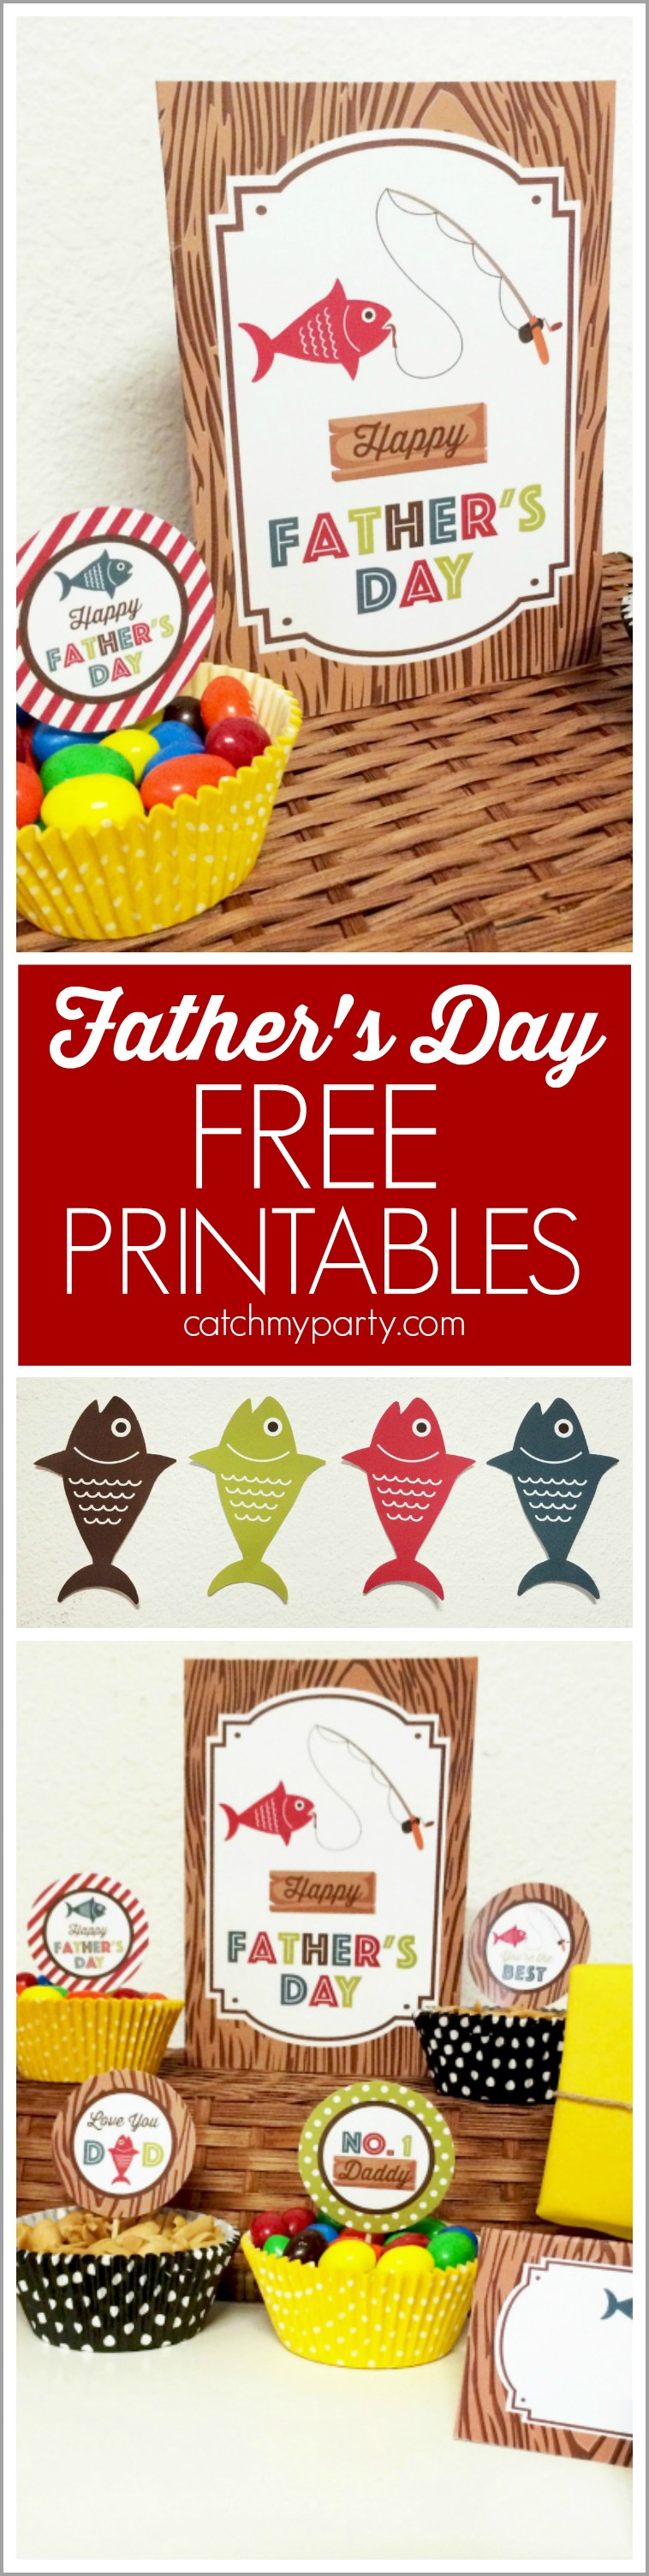 i-love-fishing-father-s-day-free-printables-catch-my-party